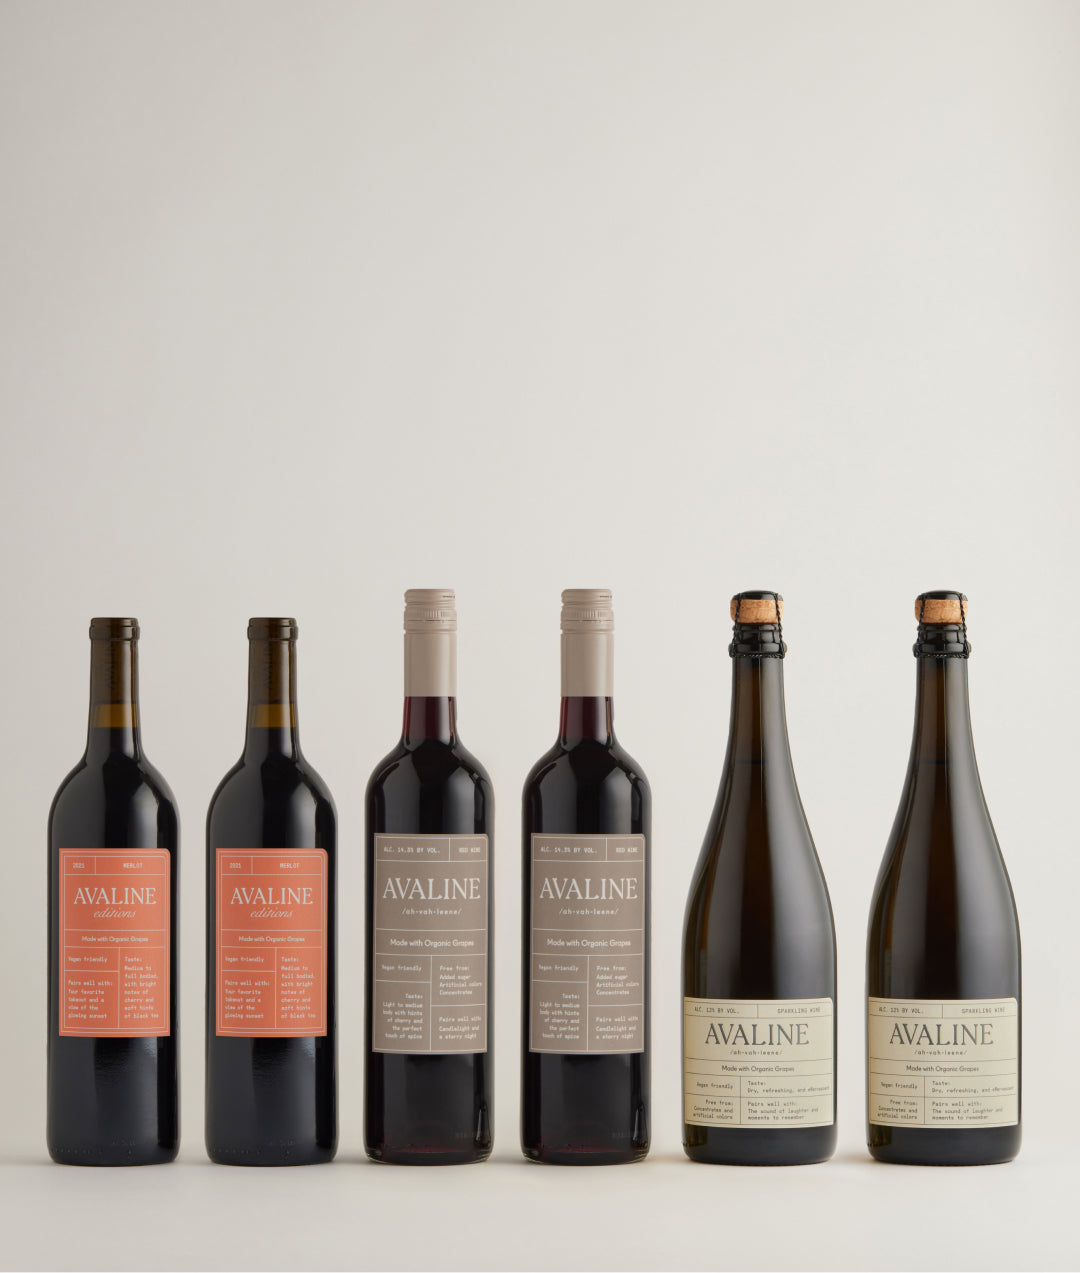 A lineup of 6 wine bottles including 2 merlot, 2 red, 2 sparkling